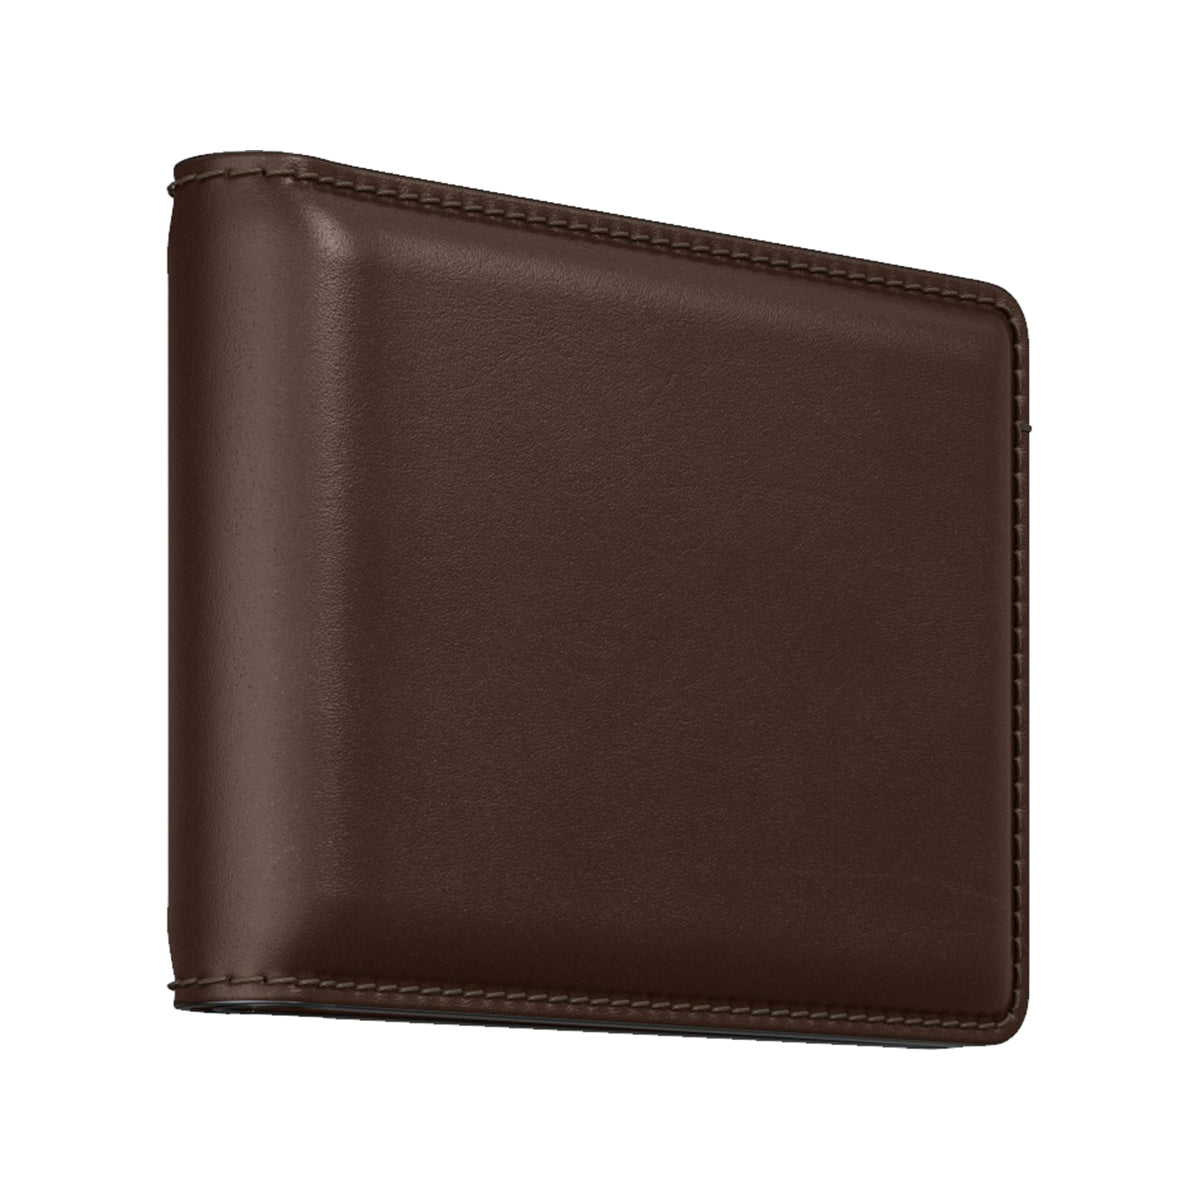 NOMAD Bifold Wallet - Rustic Brown Horween Leather.